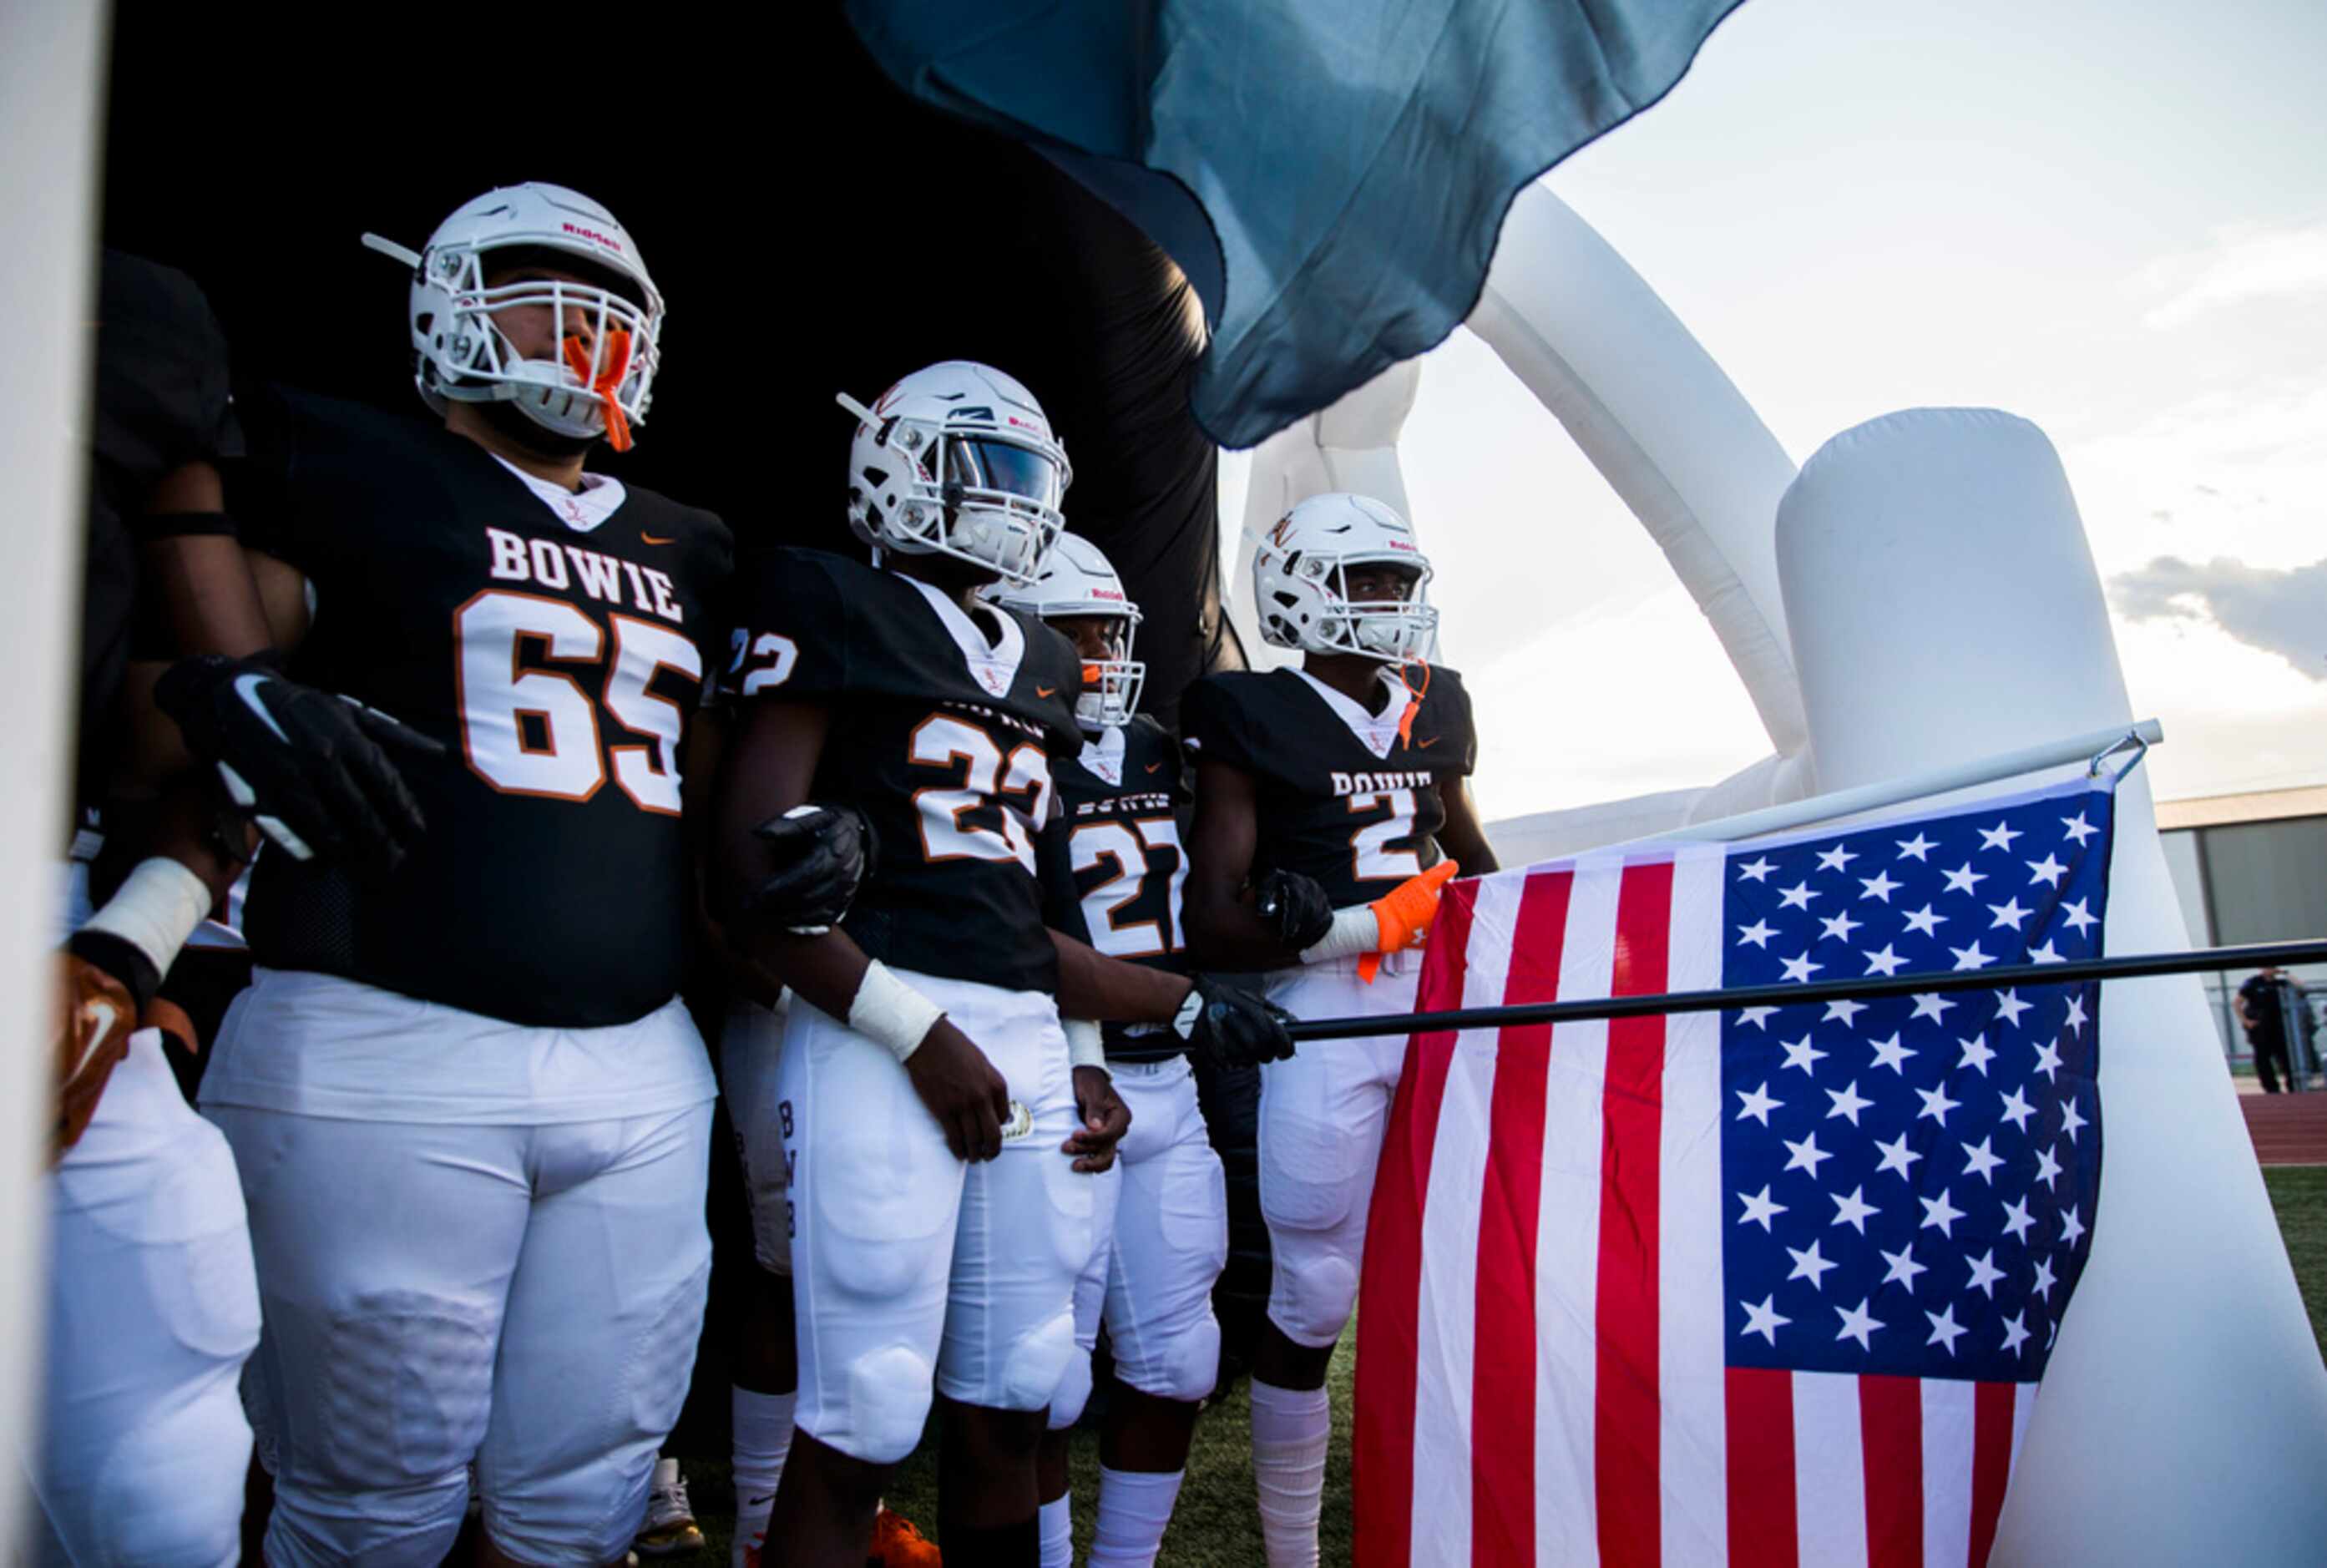 Arlington Bowie football players wait to enter the field before a high school football game...